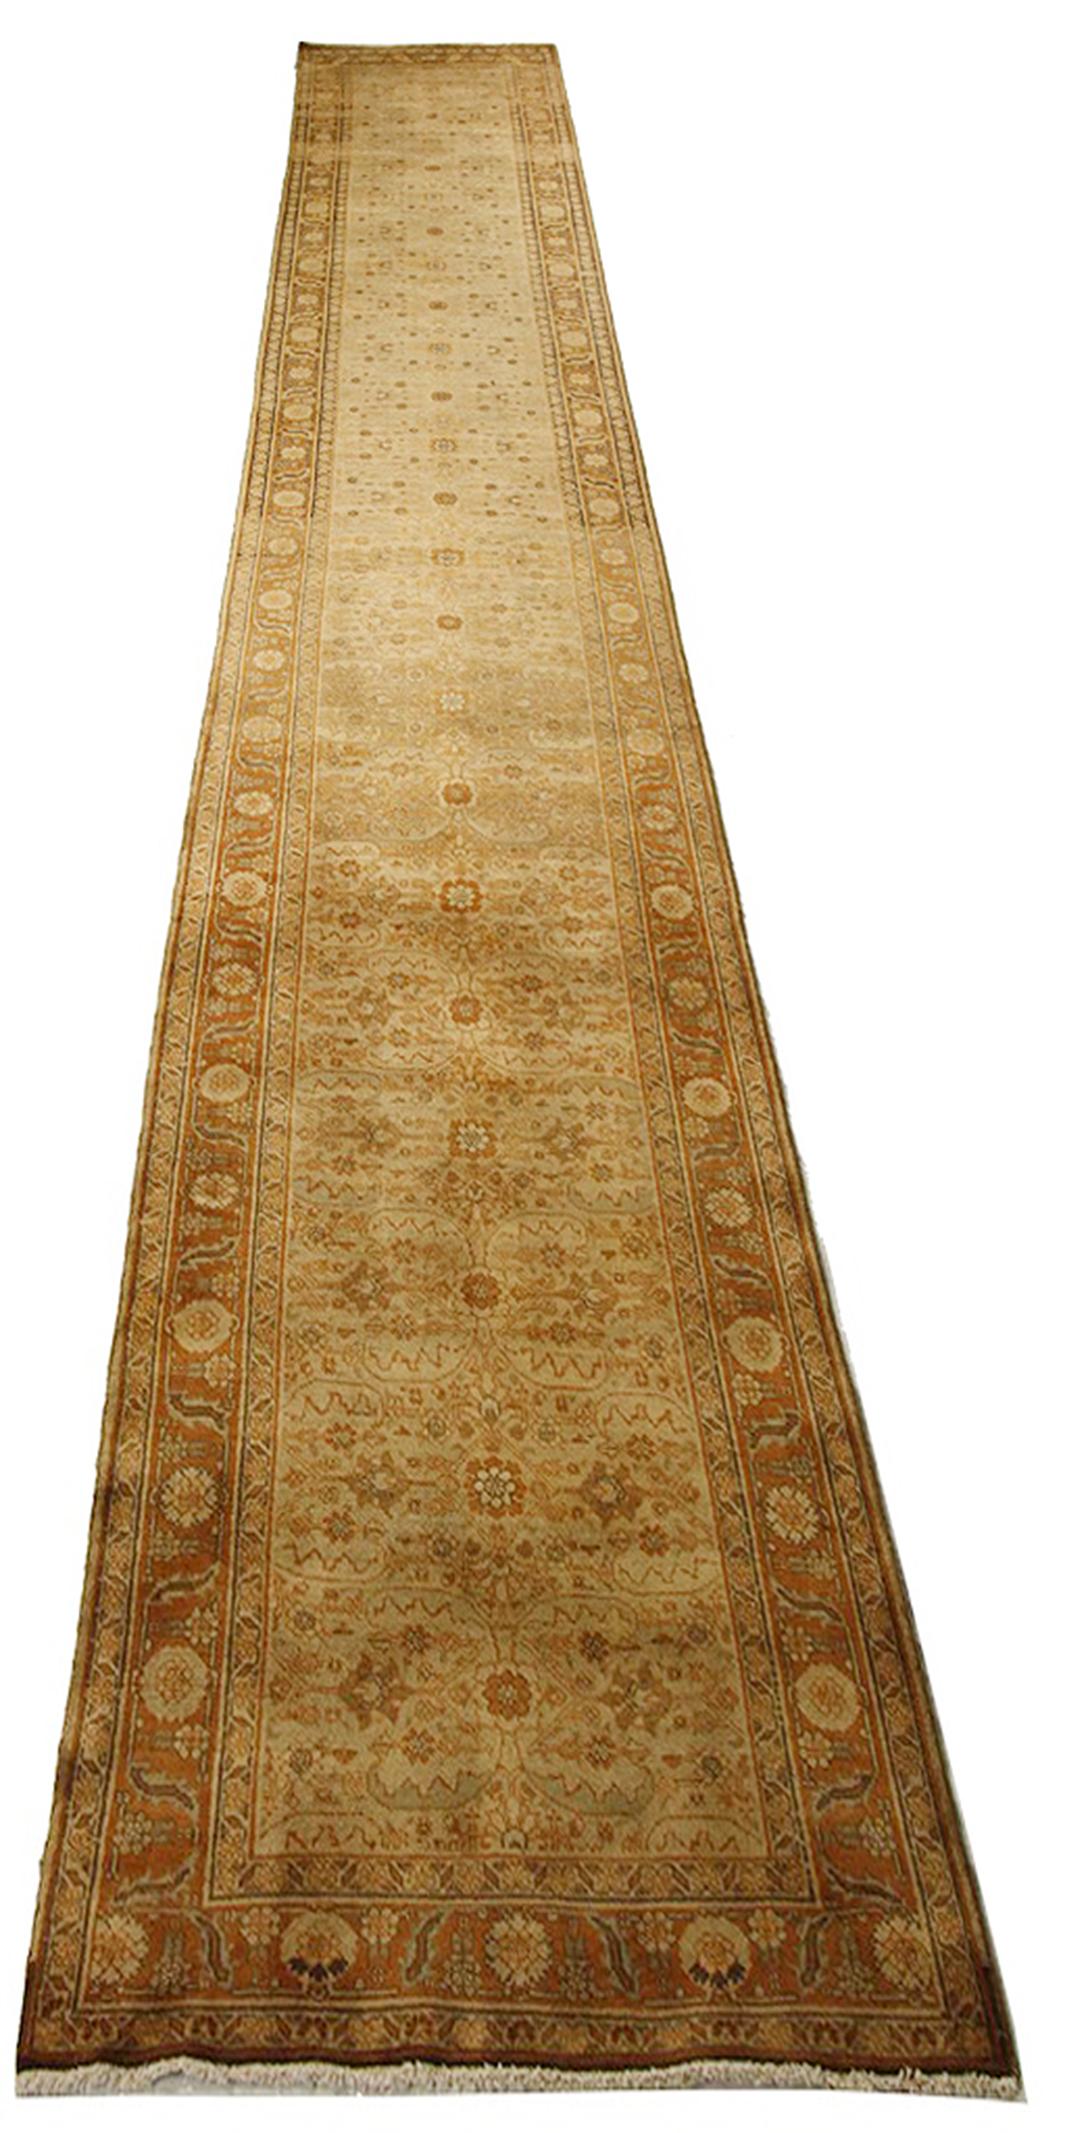 Antique Persian runner rug 11372 handwoven from the finest sheep’s wool and colored with all-natural vegetable dyes that are safe for humans and pets. It’s a traditional Tabriz weaving featuring a lovely ensemble of floral designs in brown and white